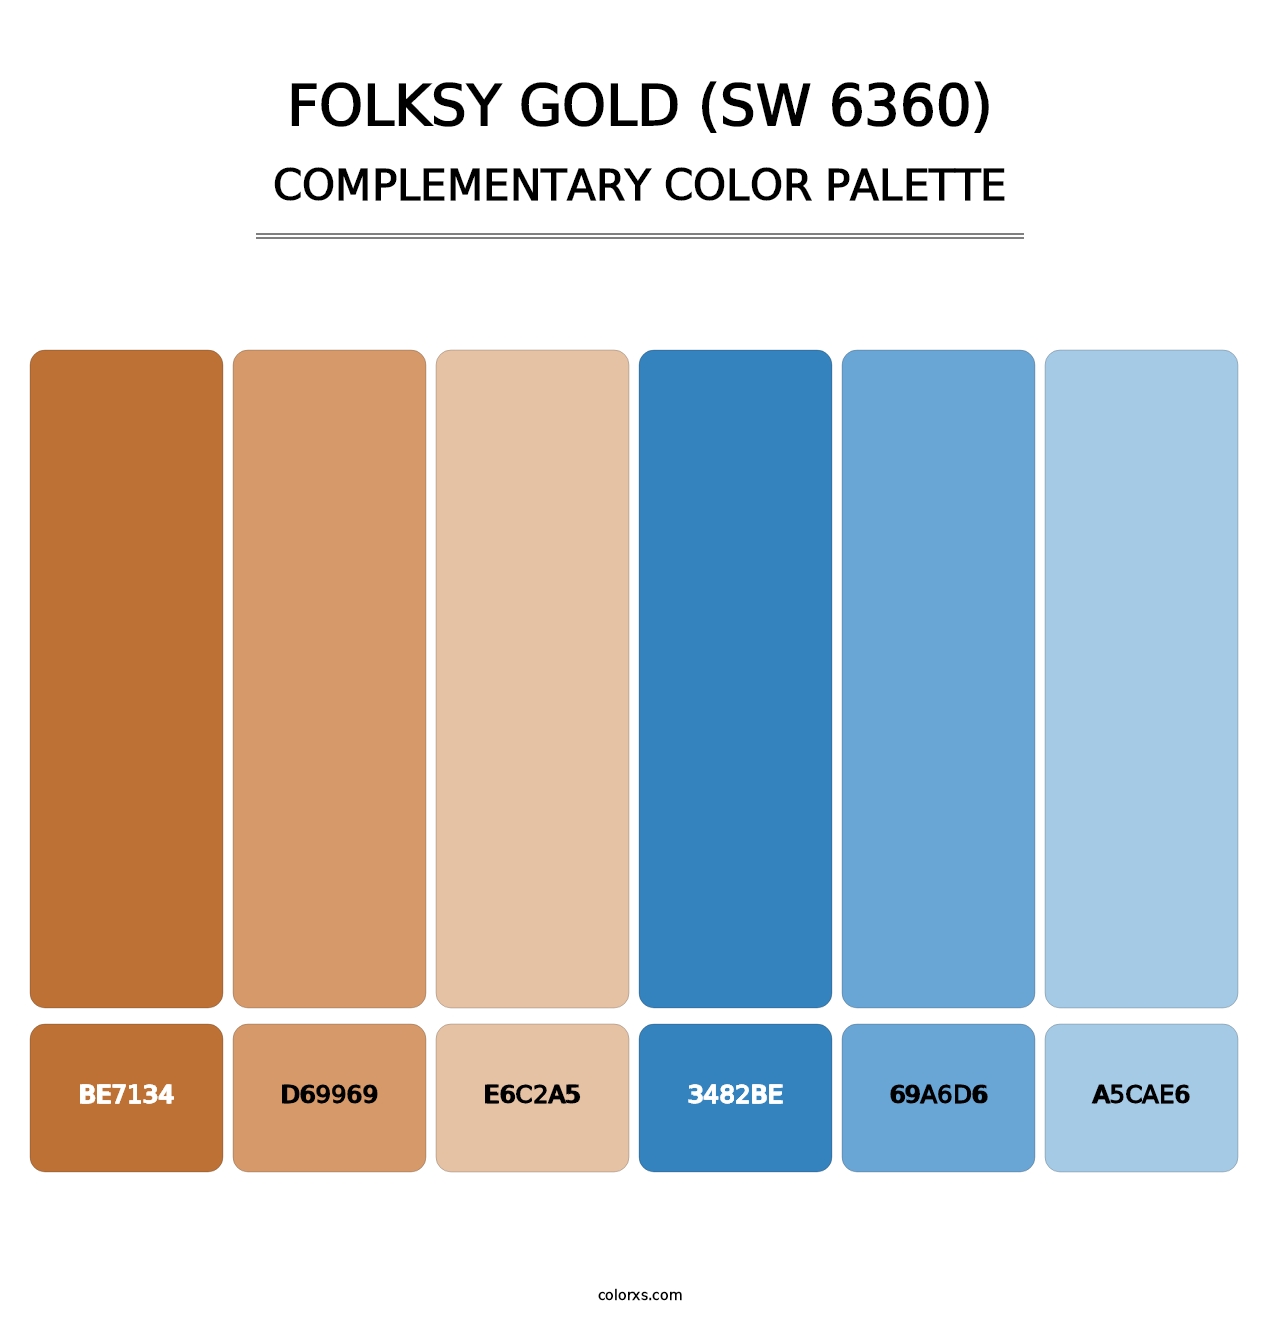 Folksy Gold (SW 6360) - Complementary Color Palette